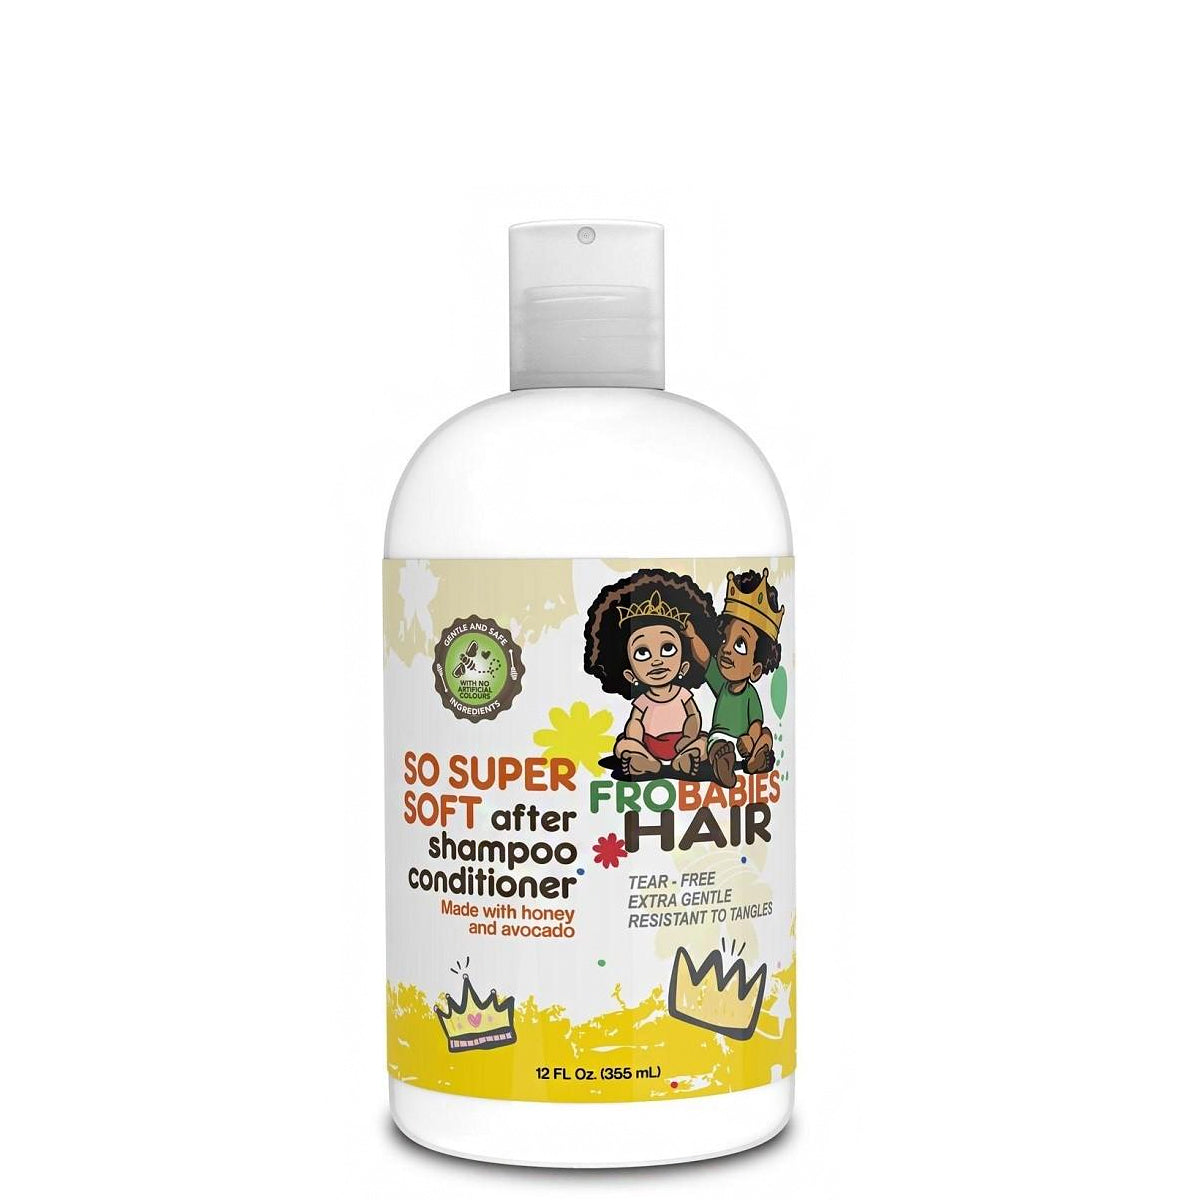 Fro Babies Hair So Super Soft After Shampoo Conditioner 12oz